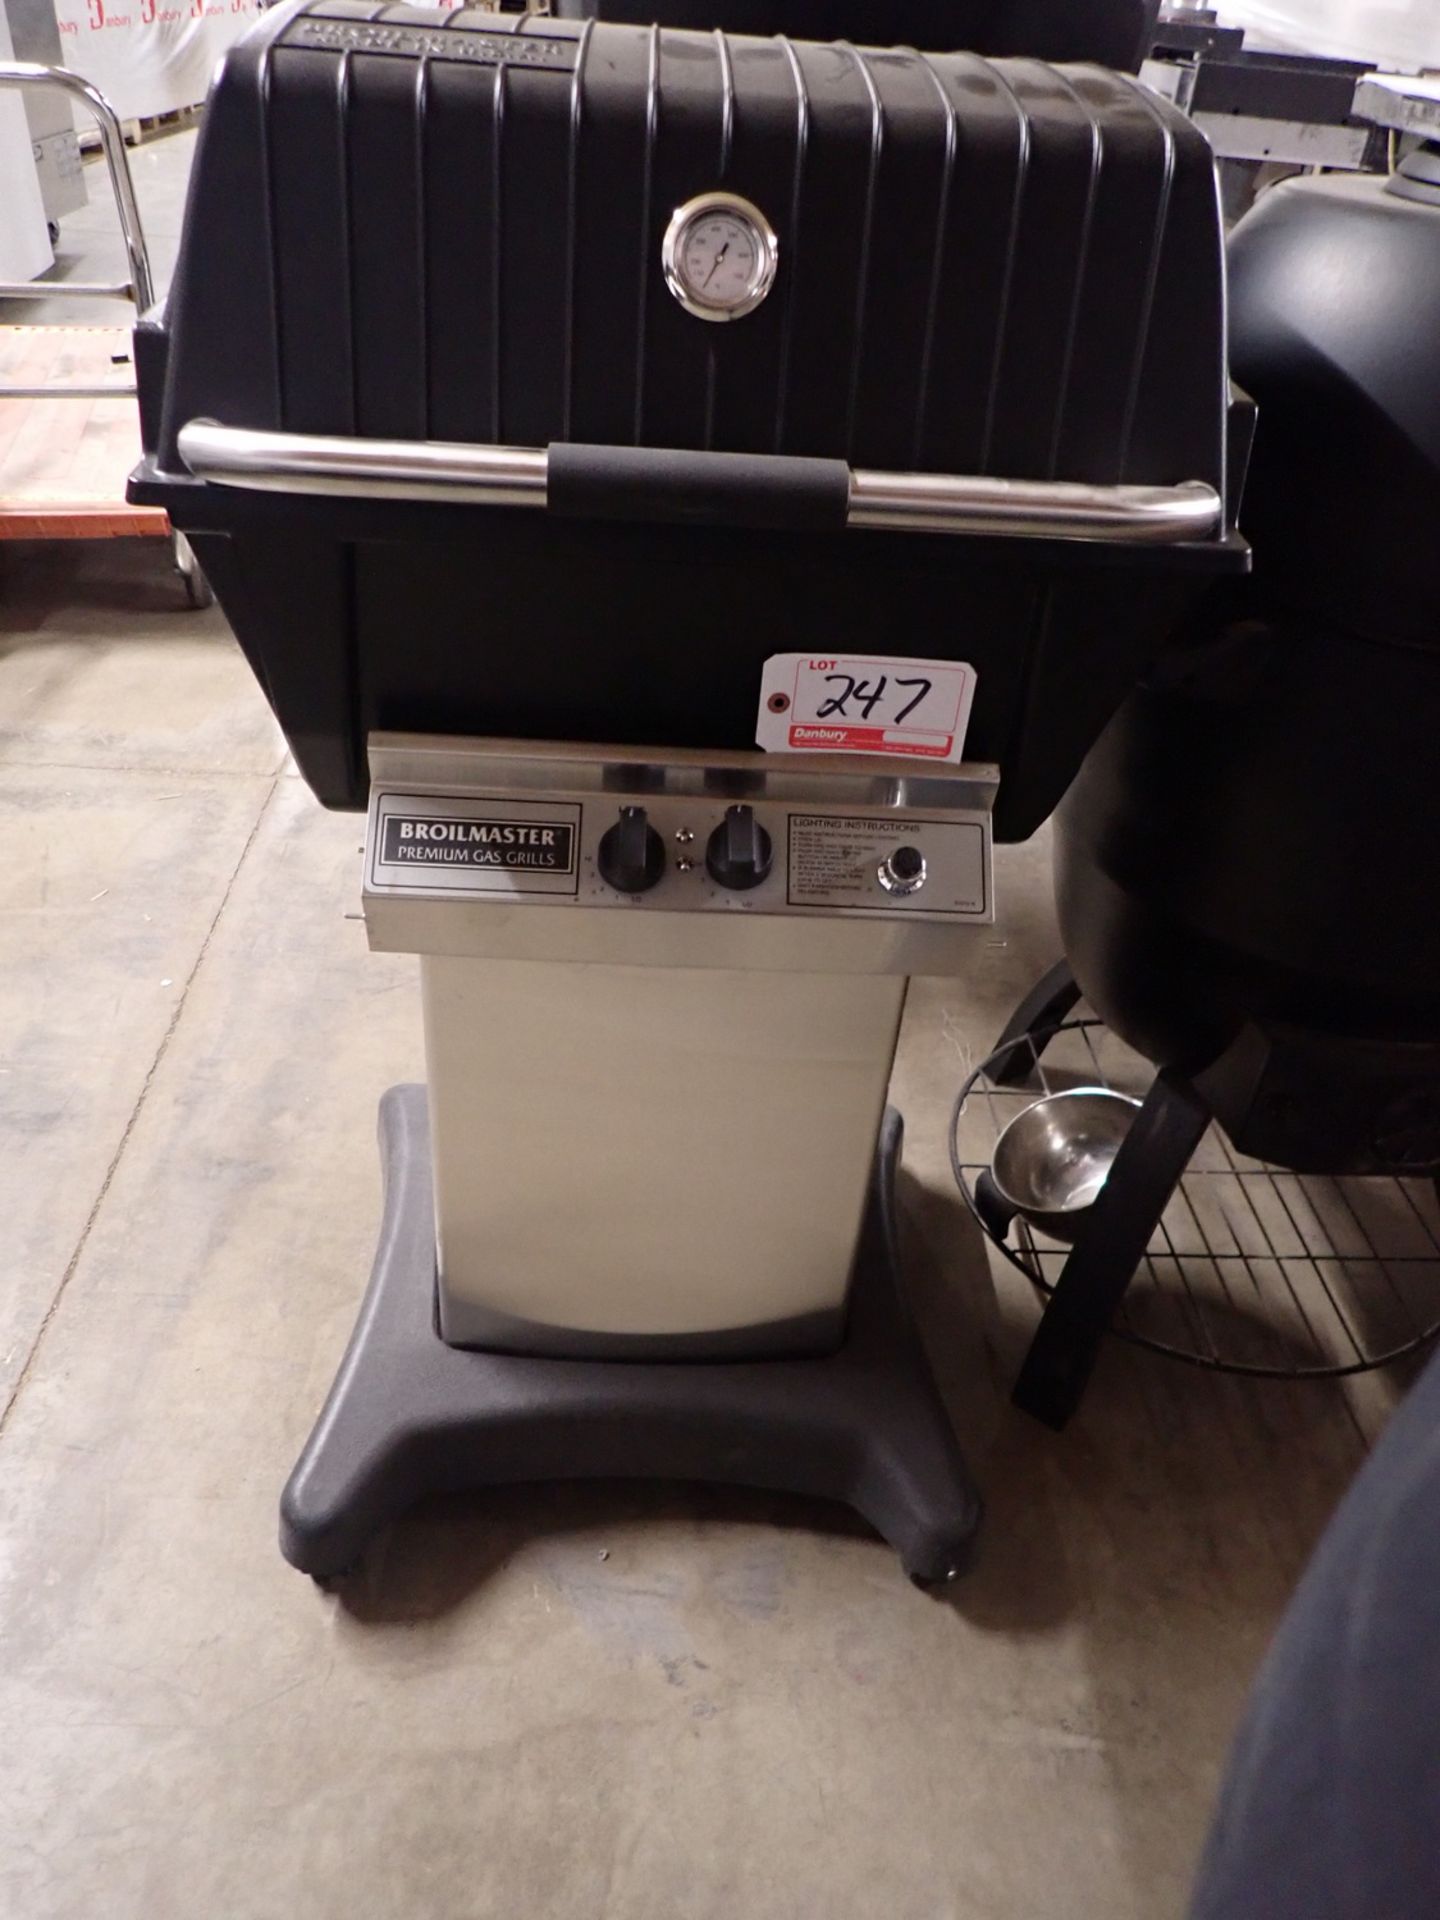 BROILMASTER 2-BURNER DELUXE PROPANE GRILL W/ S/S GRID & STAND (USED)